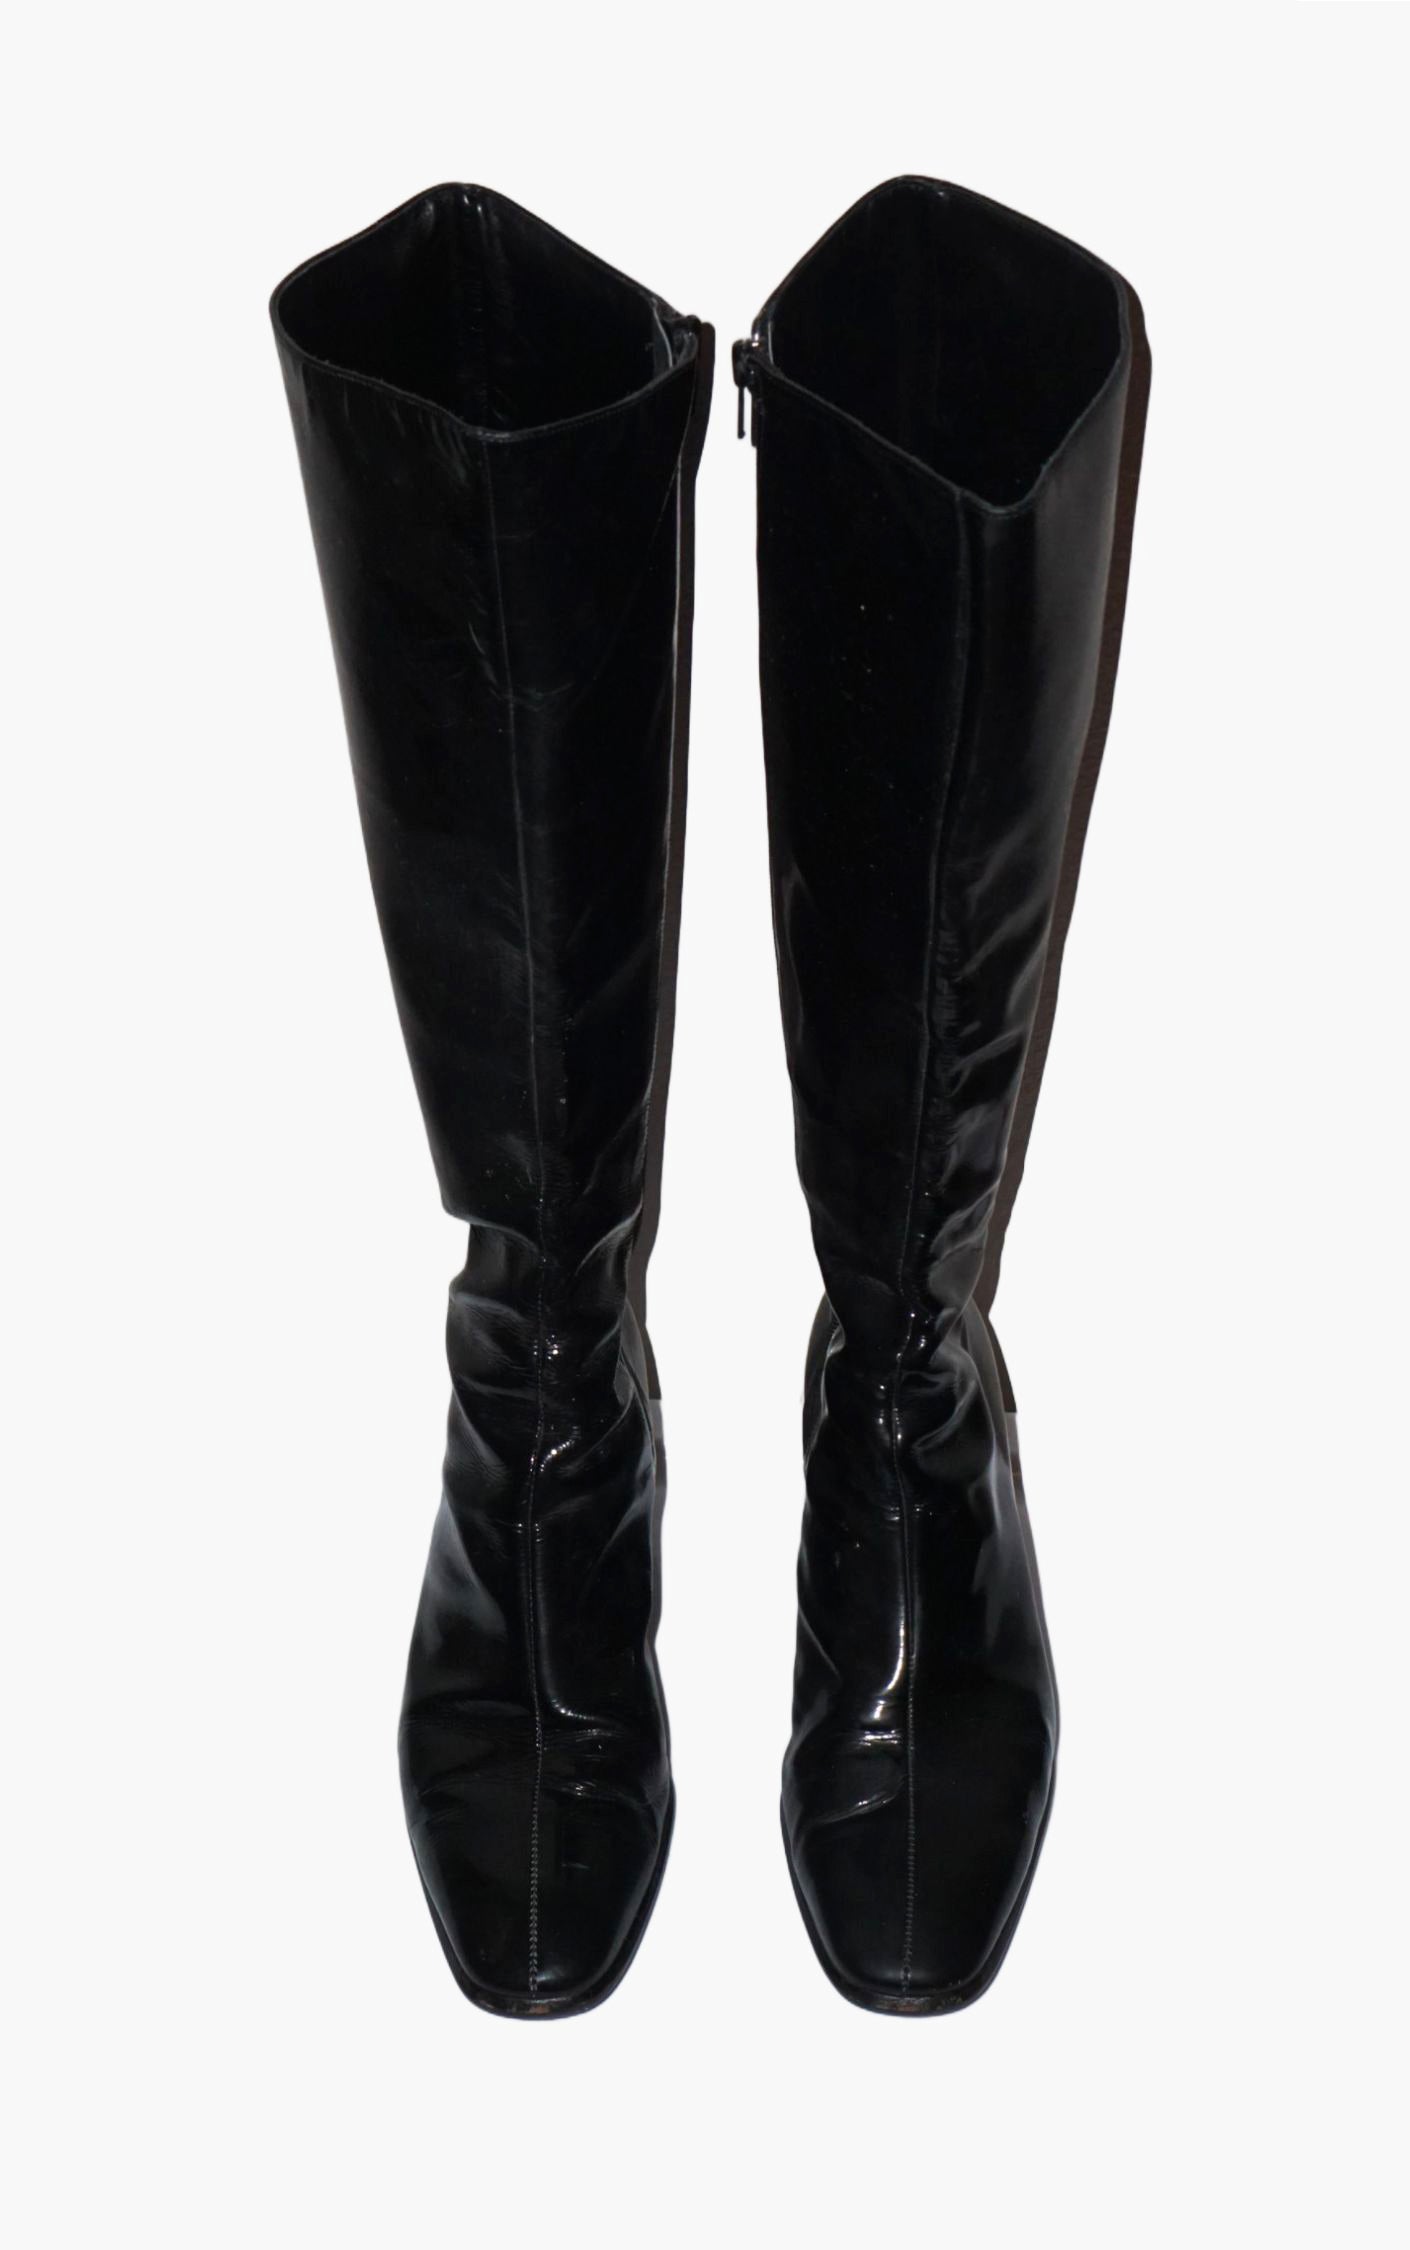 ANDREA CARRANO Black Patent Leather Knee Length Heeled Boots resellum